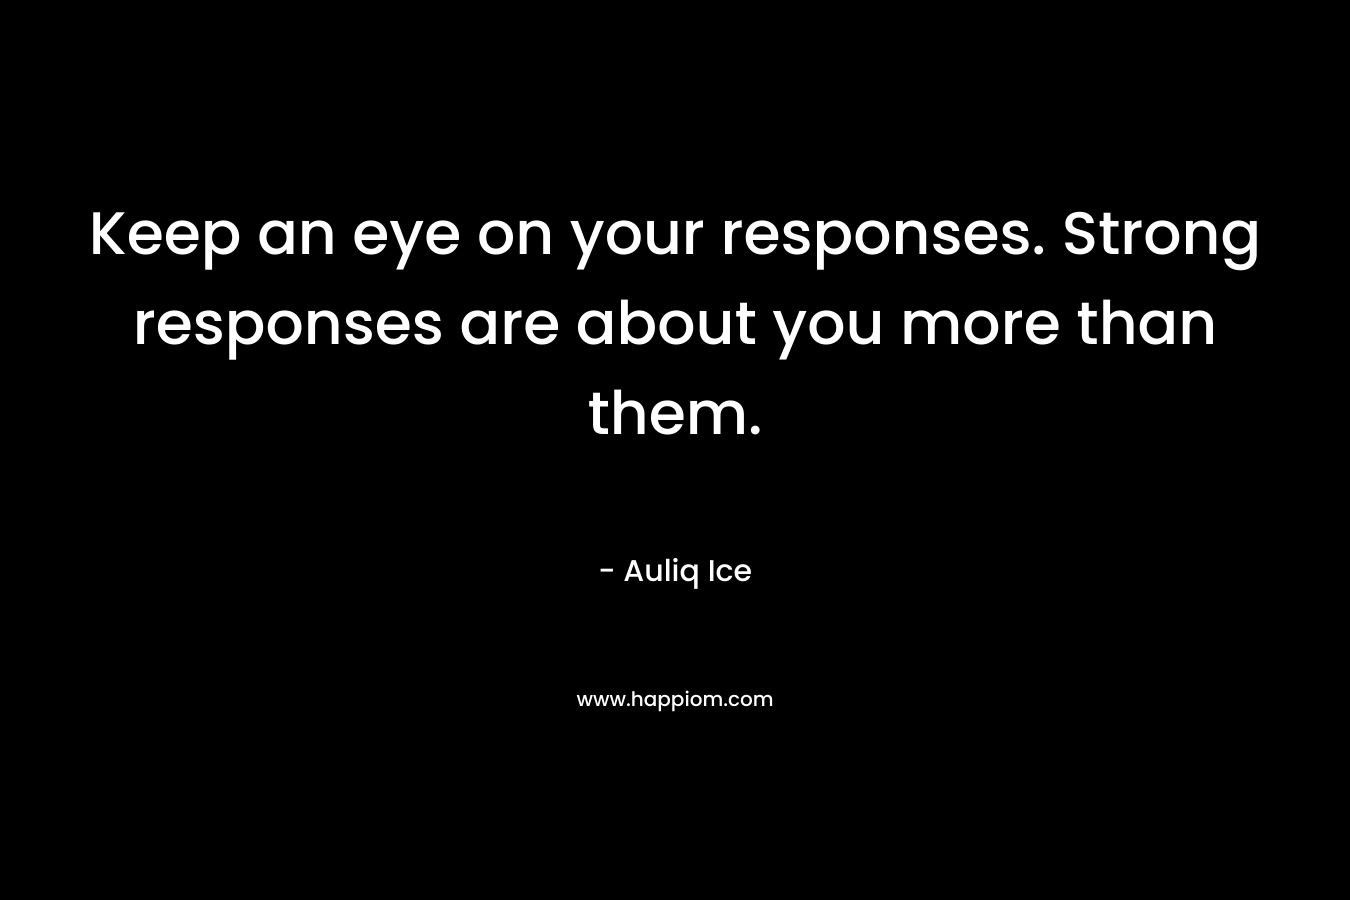 Keep an eye on your responses. Strong responses are about you more than them. – Auliq Ice